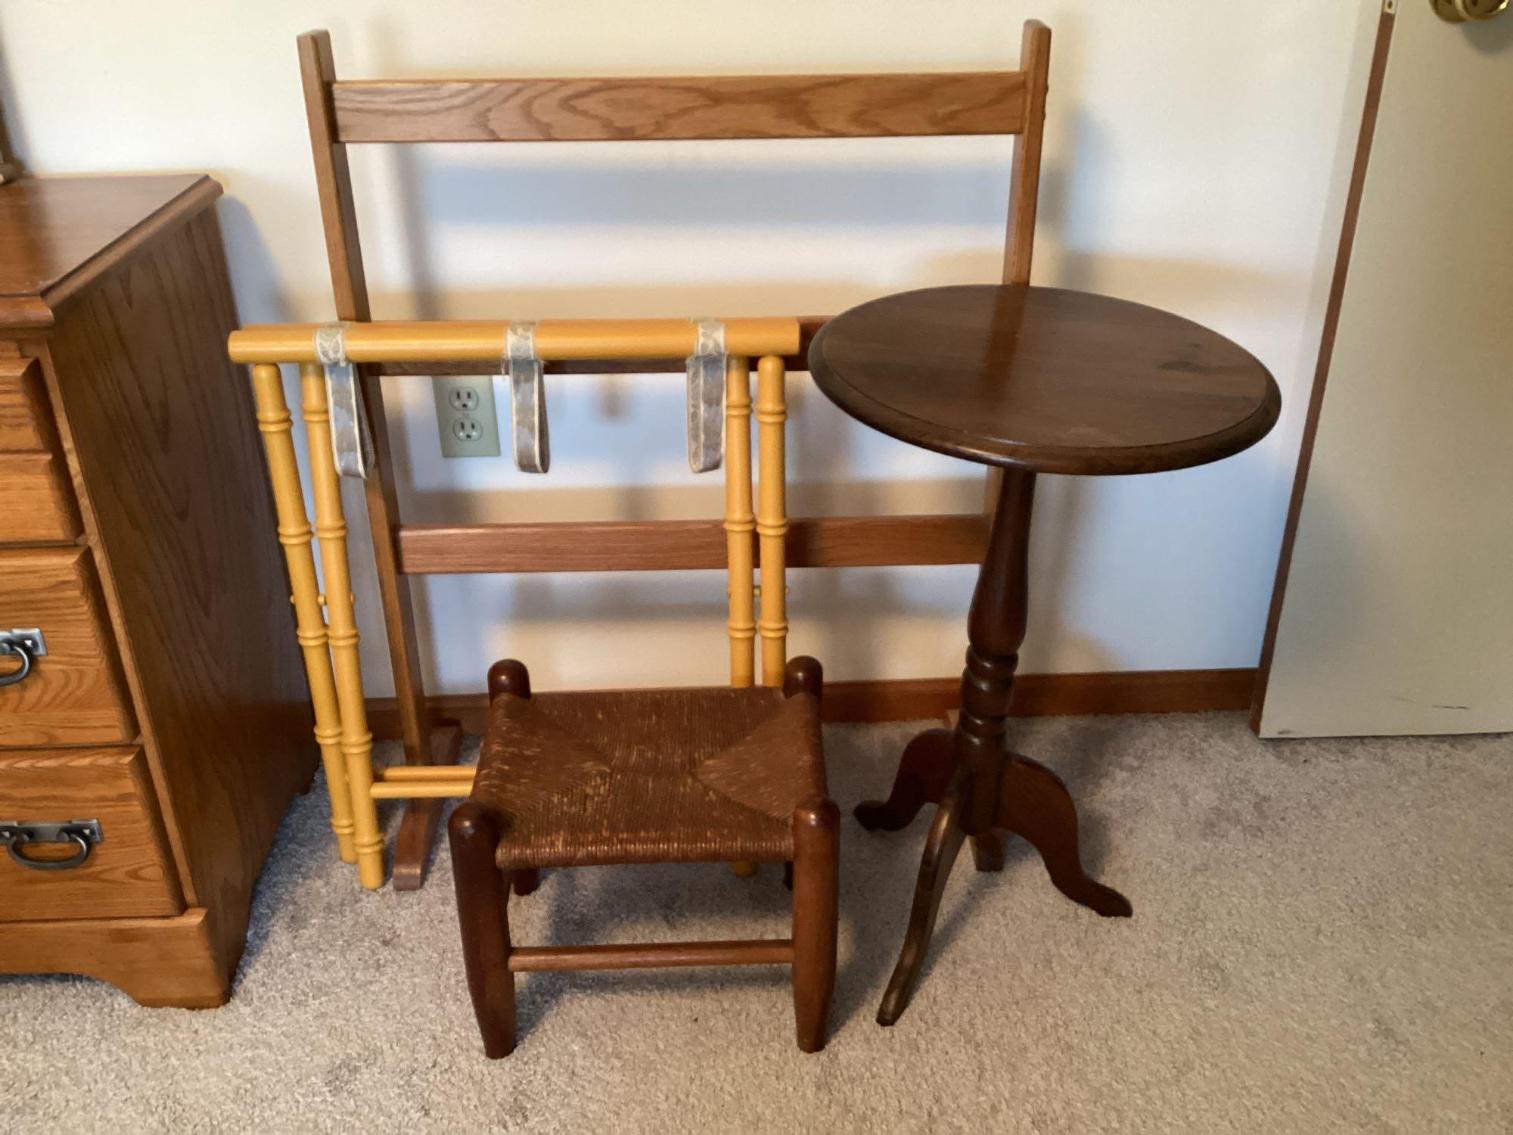 Image for Quilt Stand, Stool, Candle Stand, and Luggage Rack